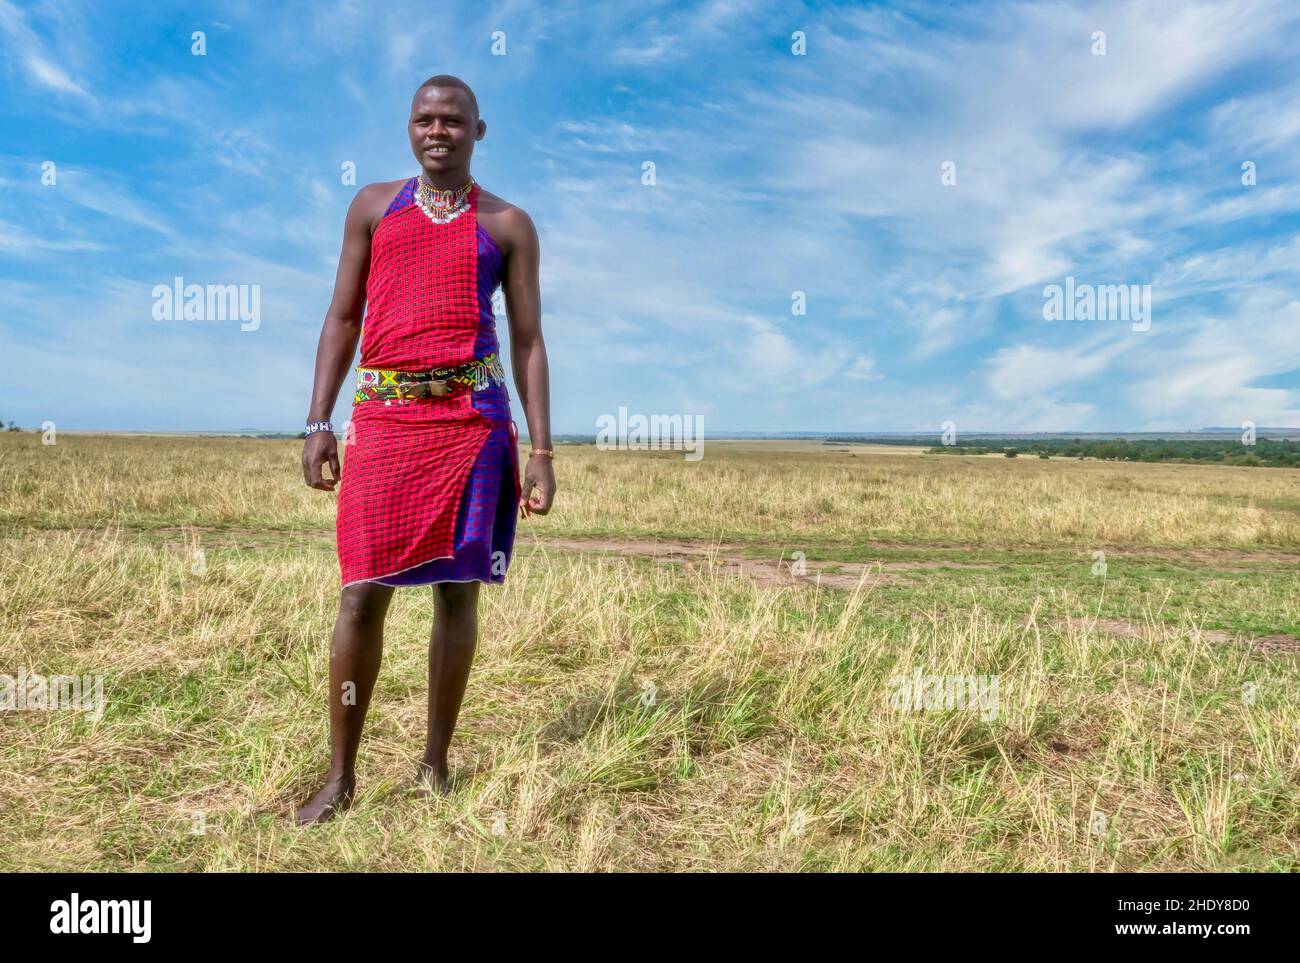 Masai Mara, Kenya - Sept. 29, 2013. A male member of the Maasai tribe wears traditional clothing and jewelry, with a wide shot of the landscape. Stock Photo